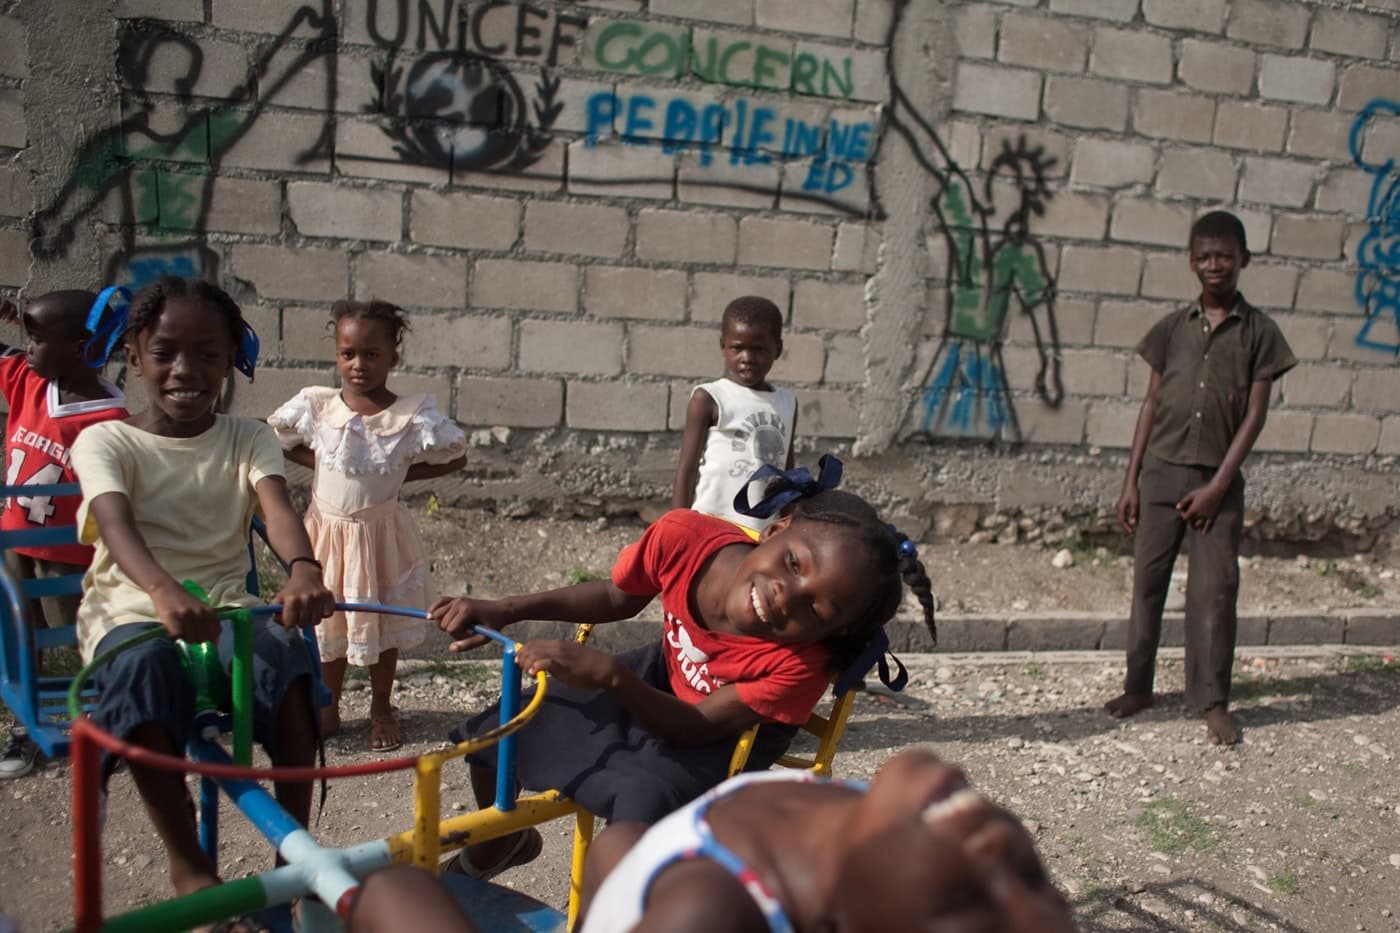 Children playing together outside as part of a Concern program